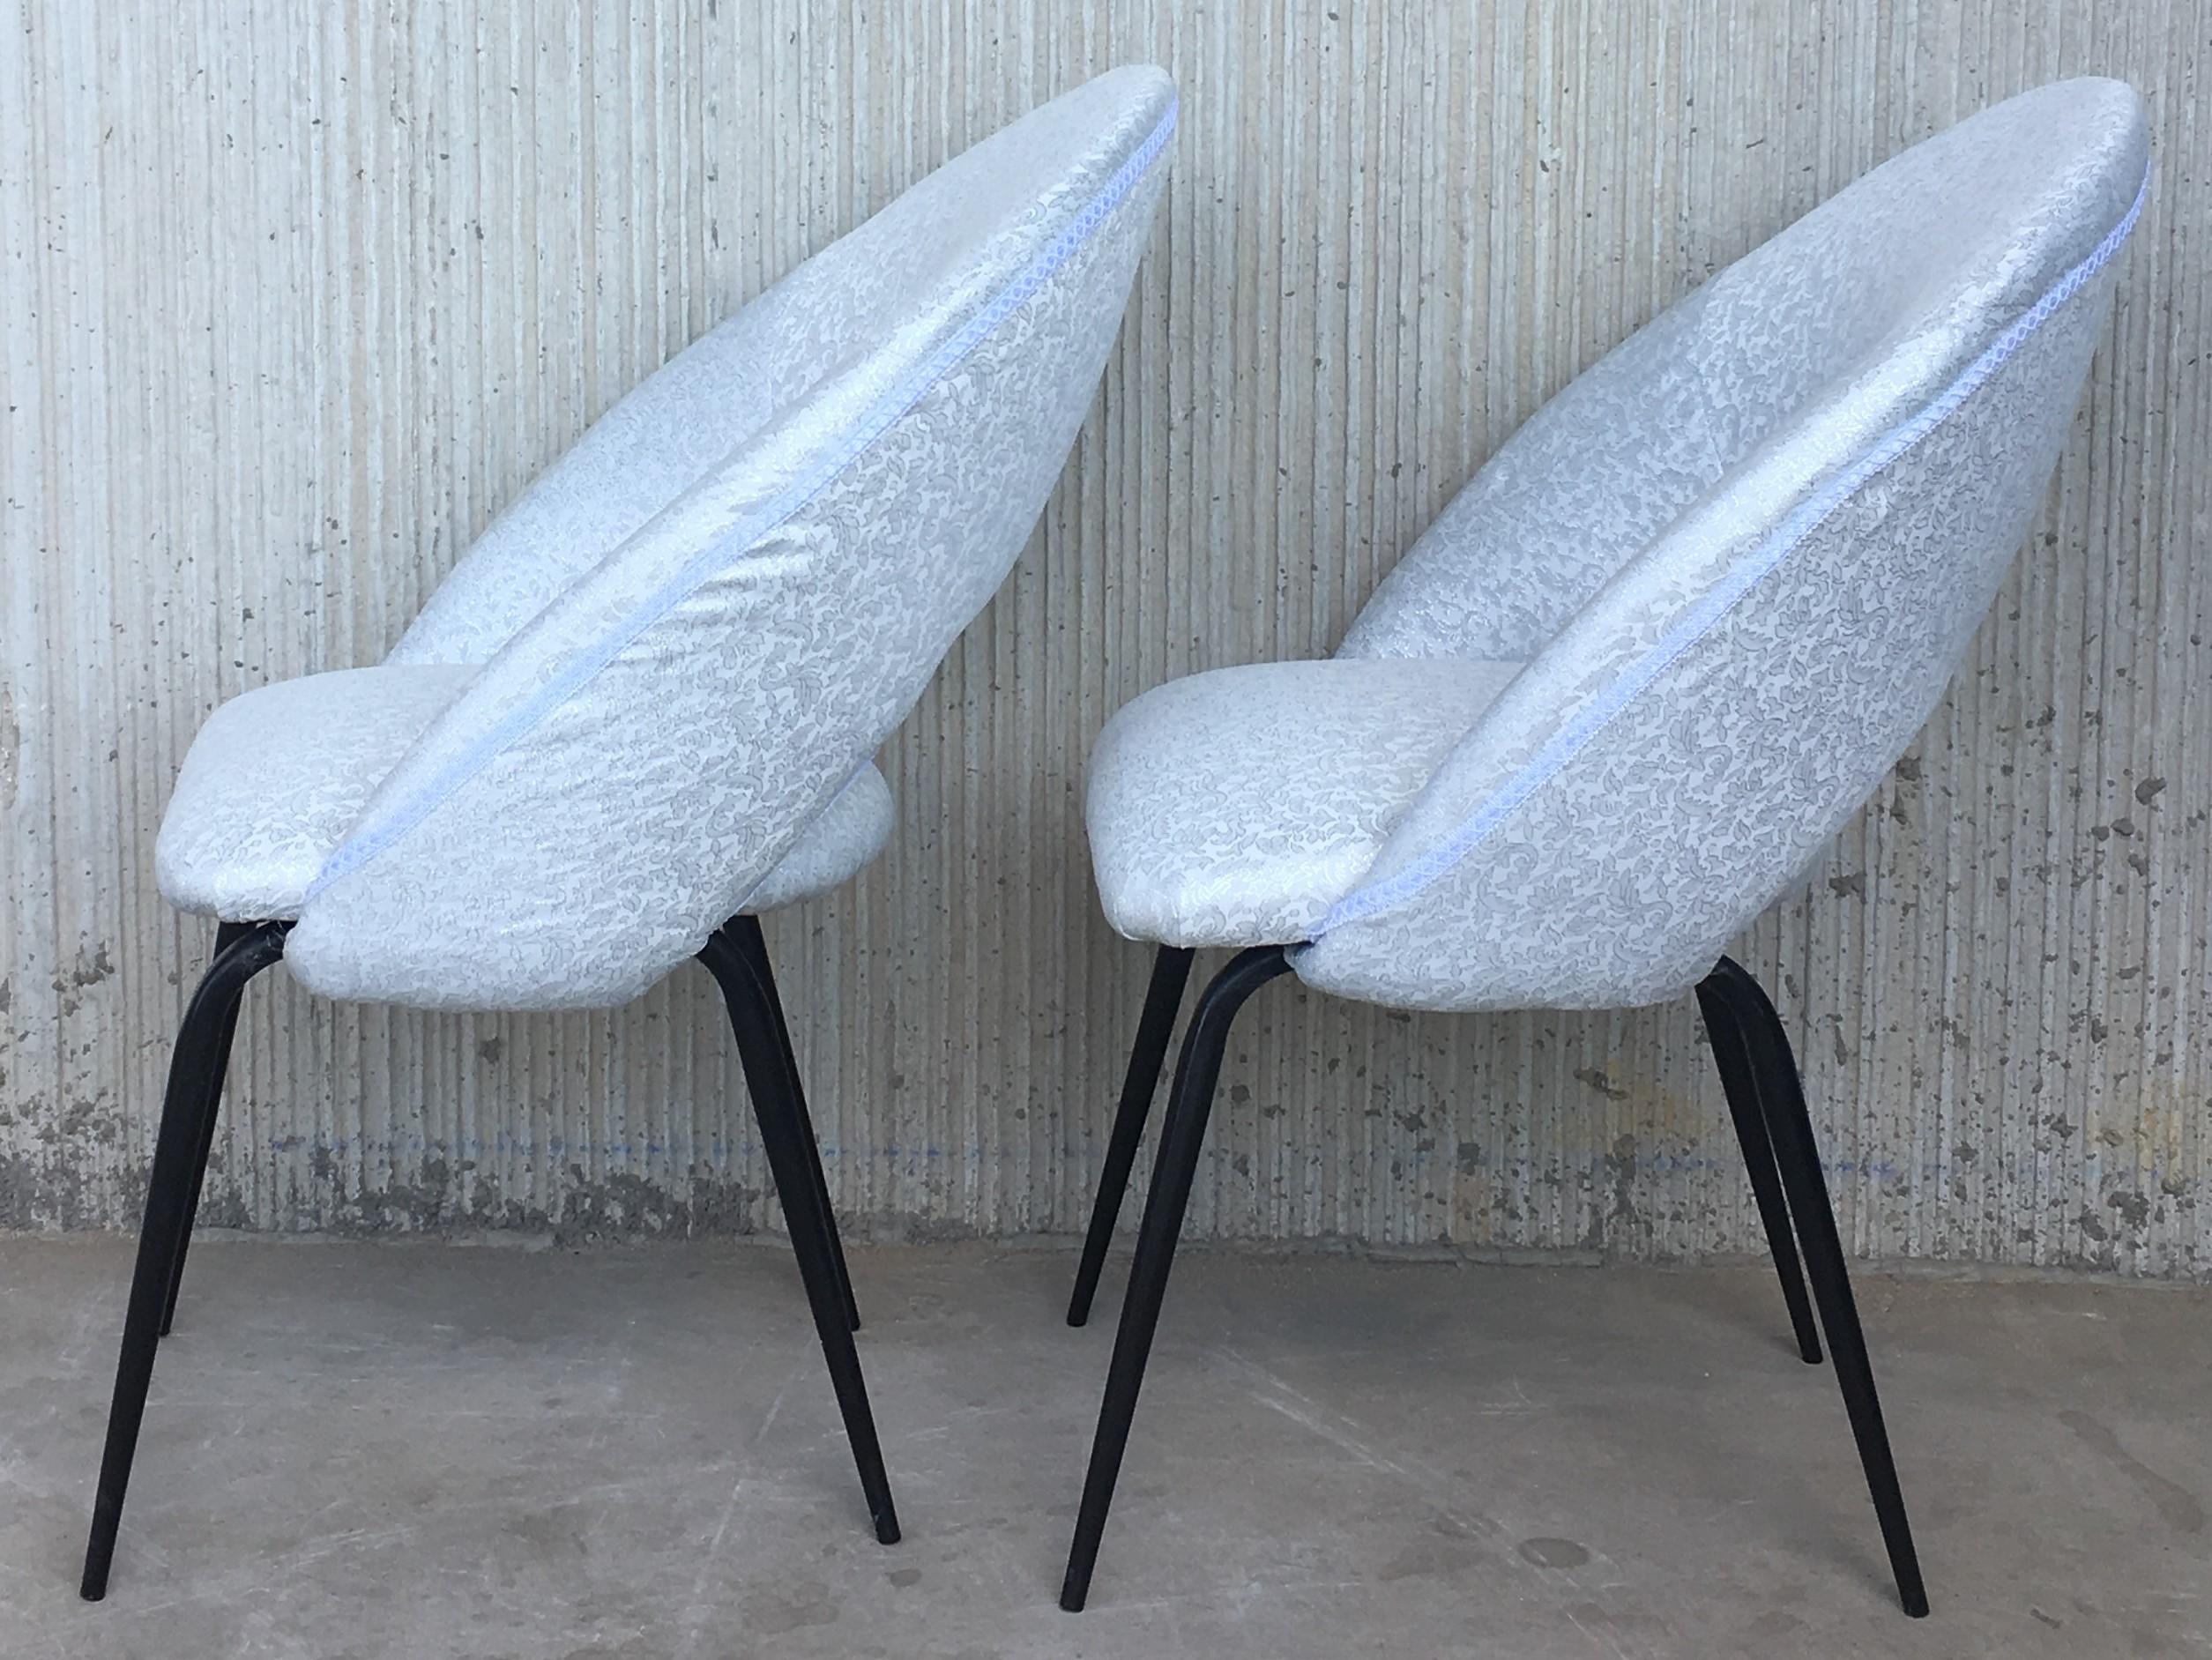 Midcentury Pair of Italian Chairs with Arched Seats and Arched Backrest (Italienisch)